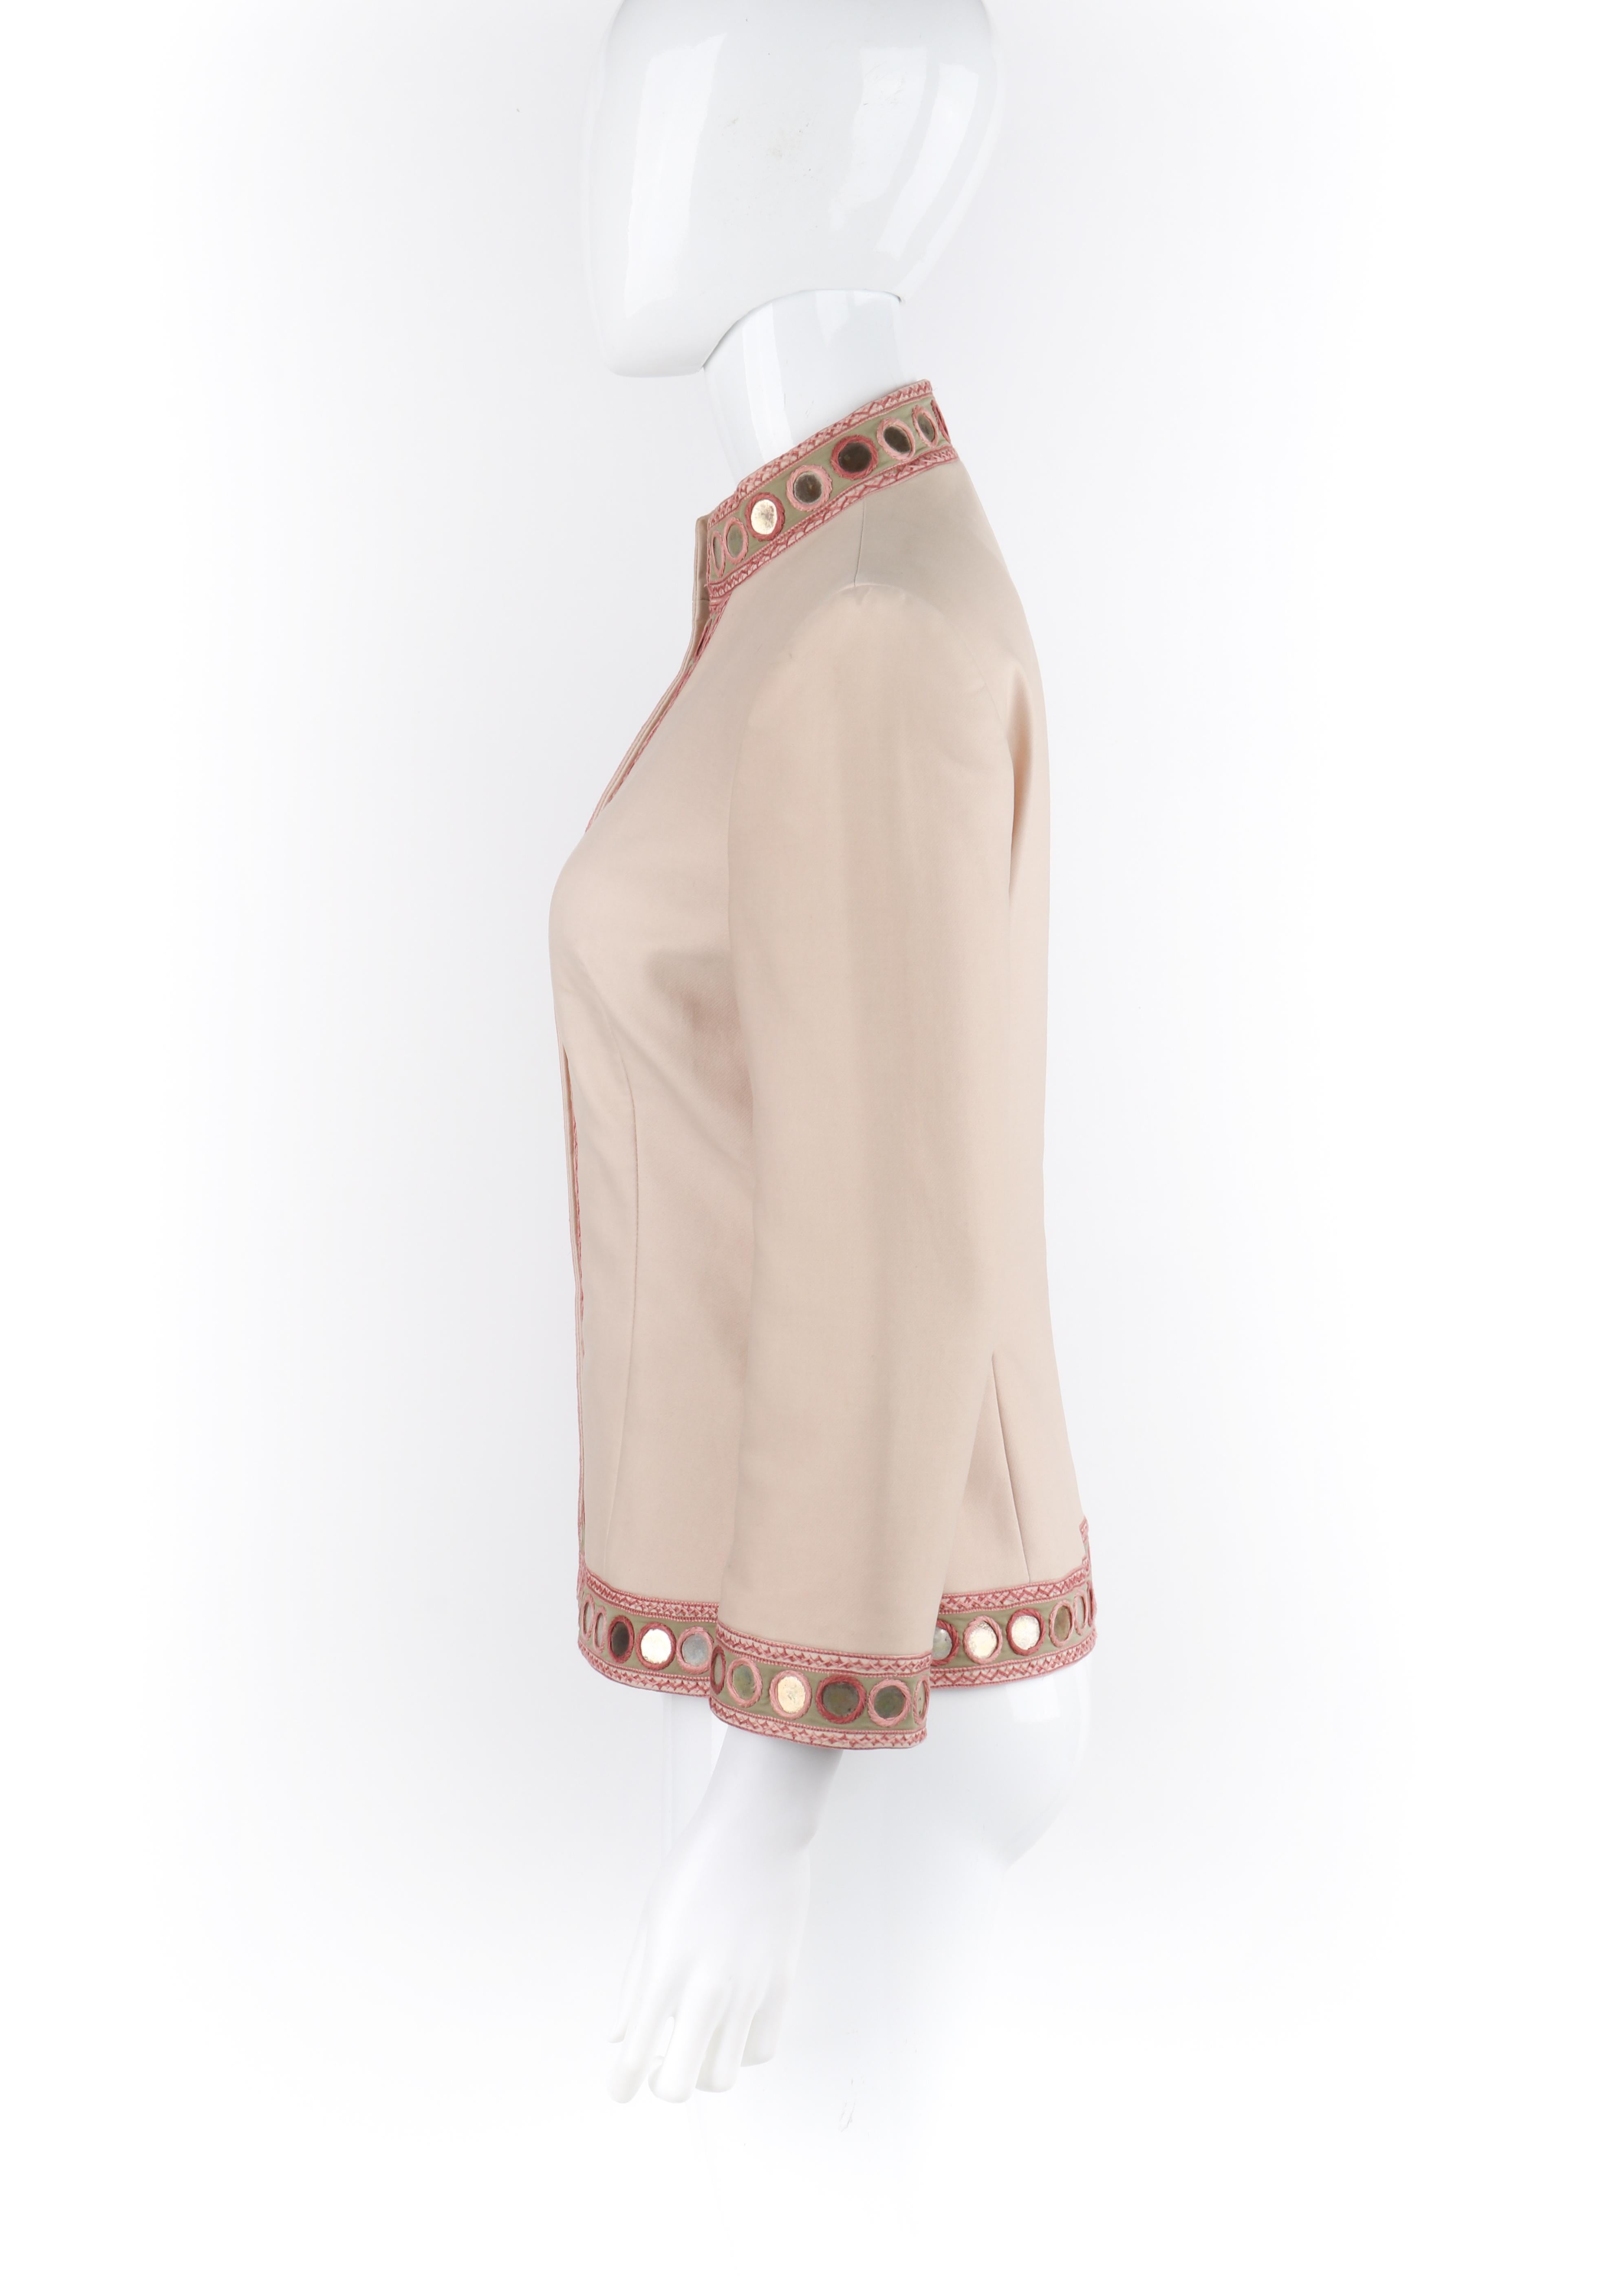 ALEXANDER McQUEEN S/S 2005 Beige Gold Coin Embroidered Collared Button Up Jacket For Sale 3